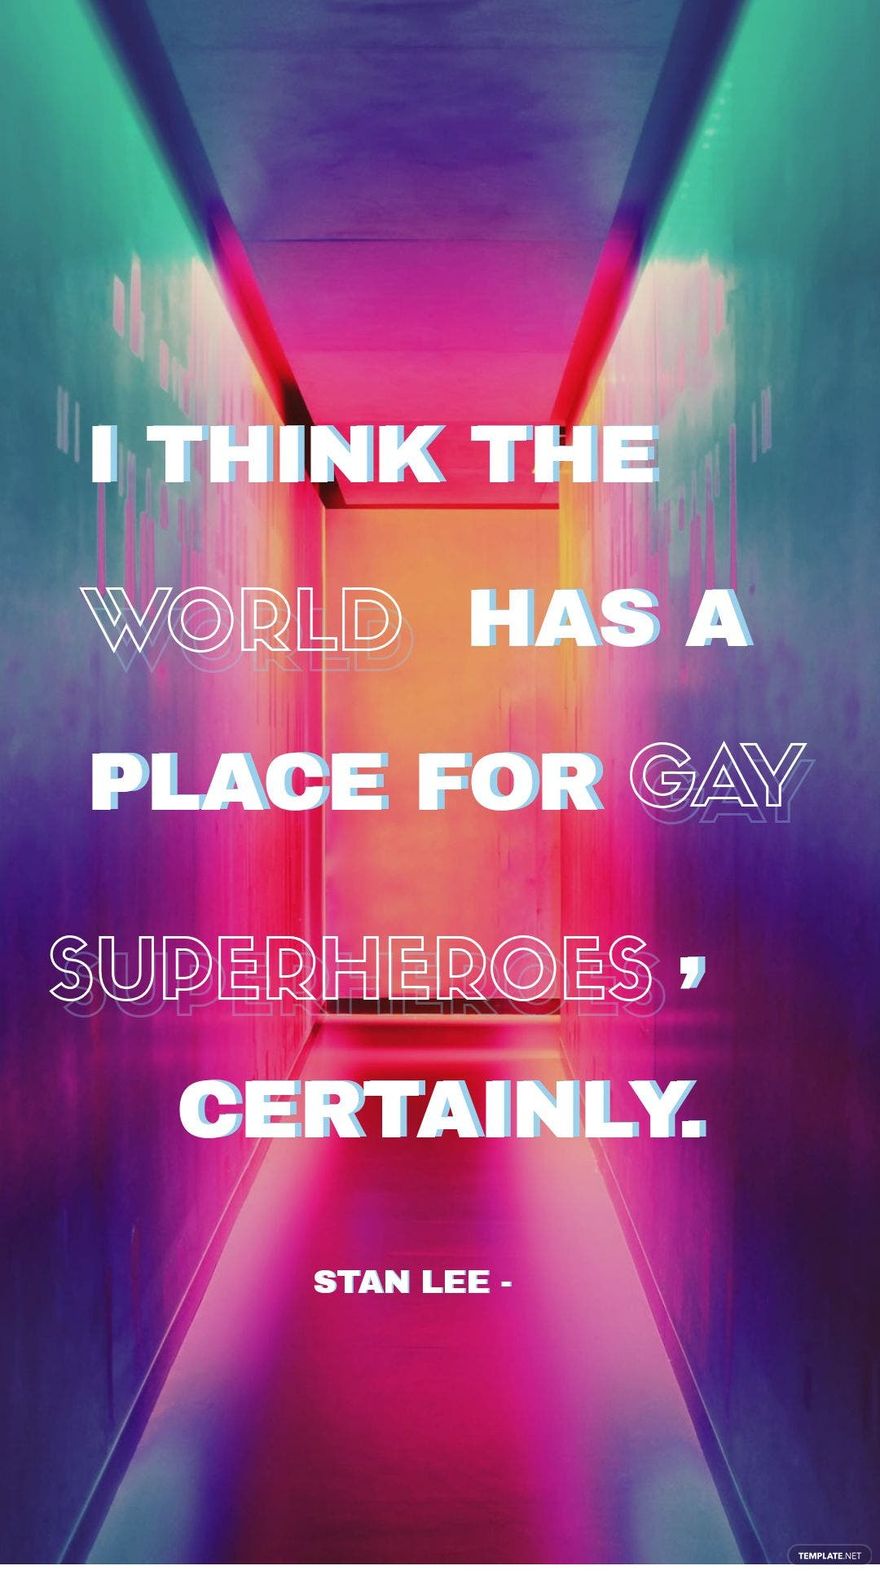 Stan Lee - I think the world has a place for gay superheroes, certainly.